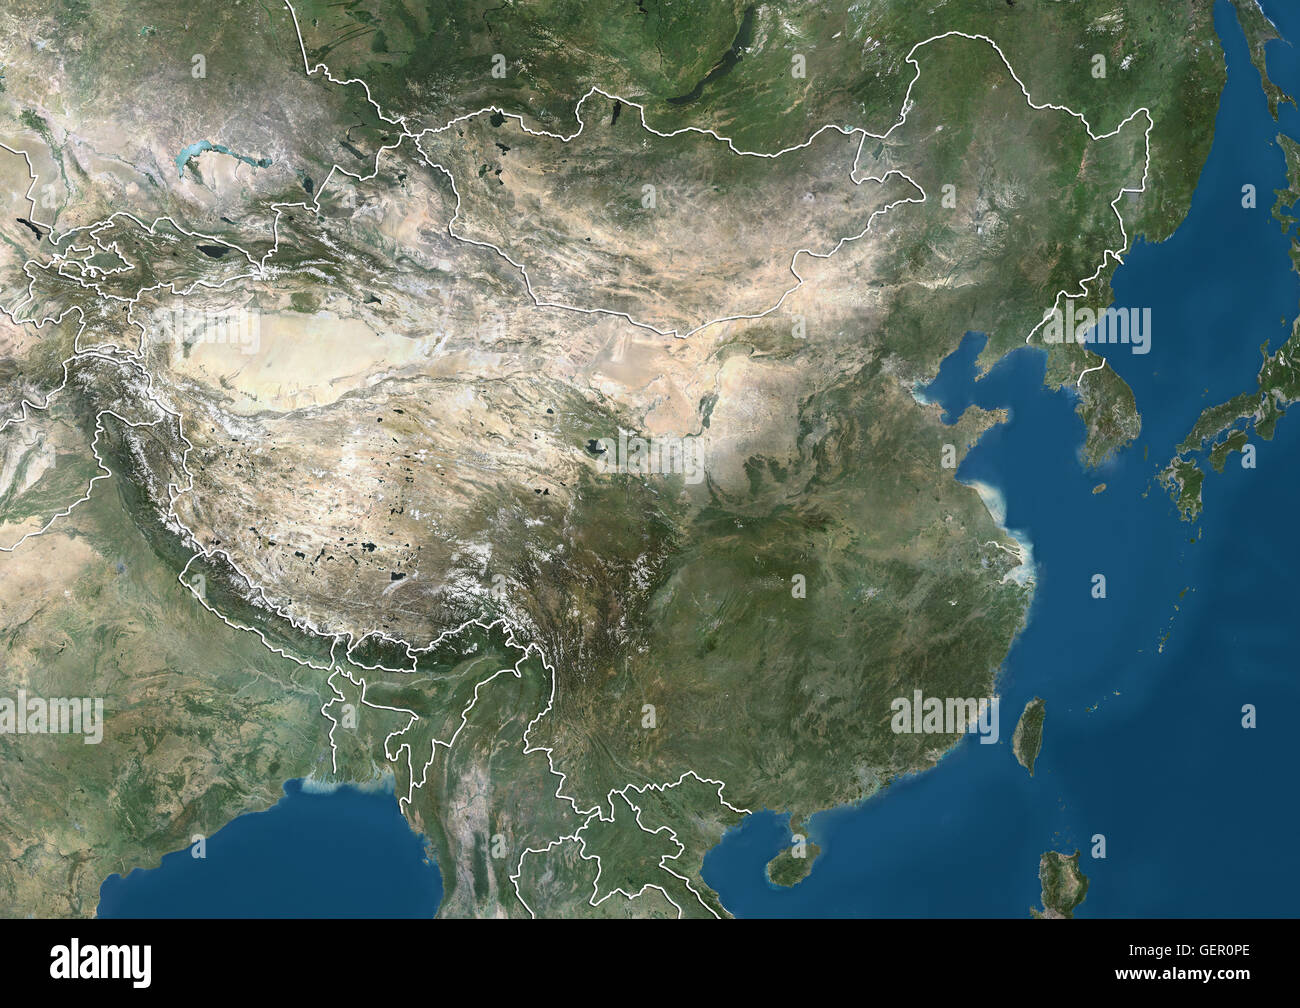 Satellite view of China and Eastern Asia (with country boundaries). This image was compiled from data acquired by Landsat satellites. Stock Photo